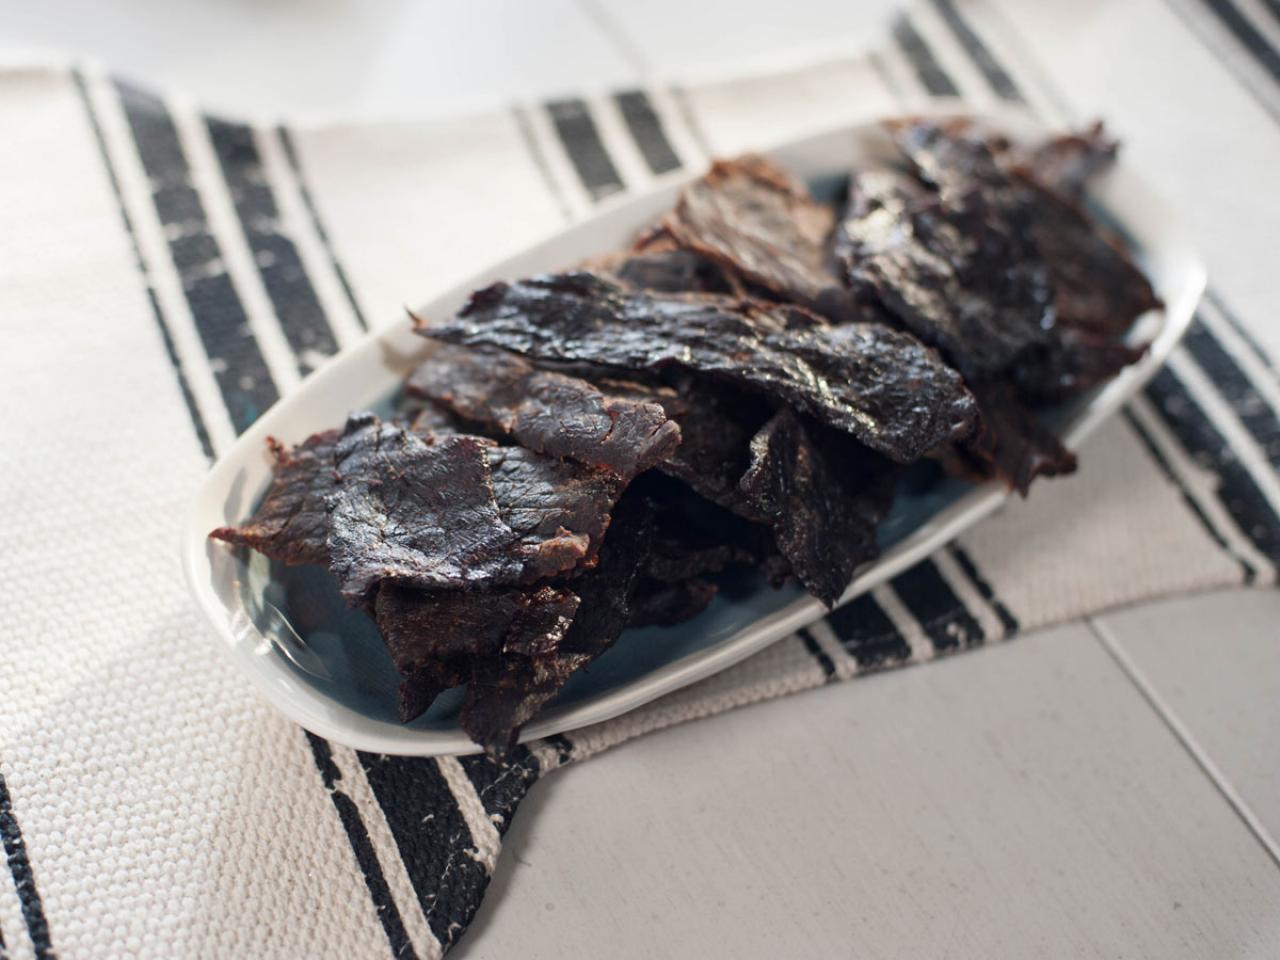 Homemade Beef Jerky Recipe (Dehydrator + Oven Instructions) - The House &  Homestead